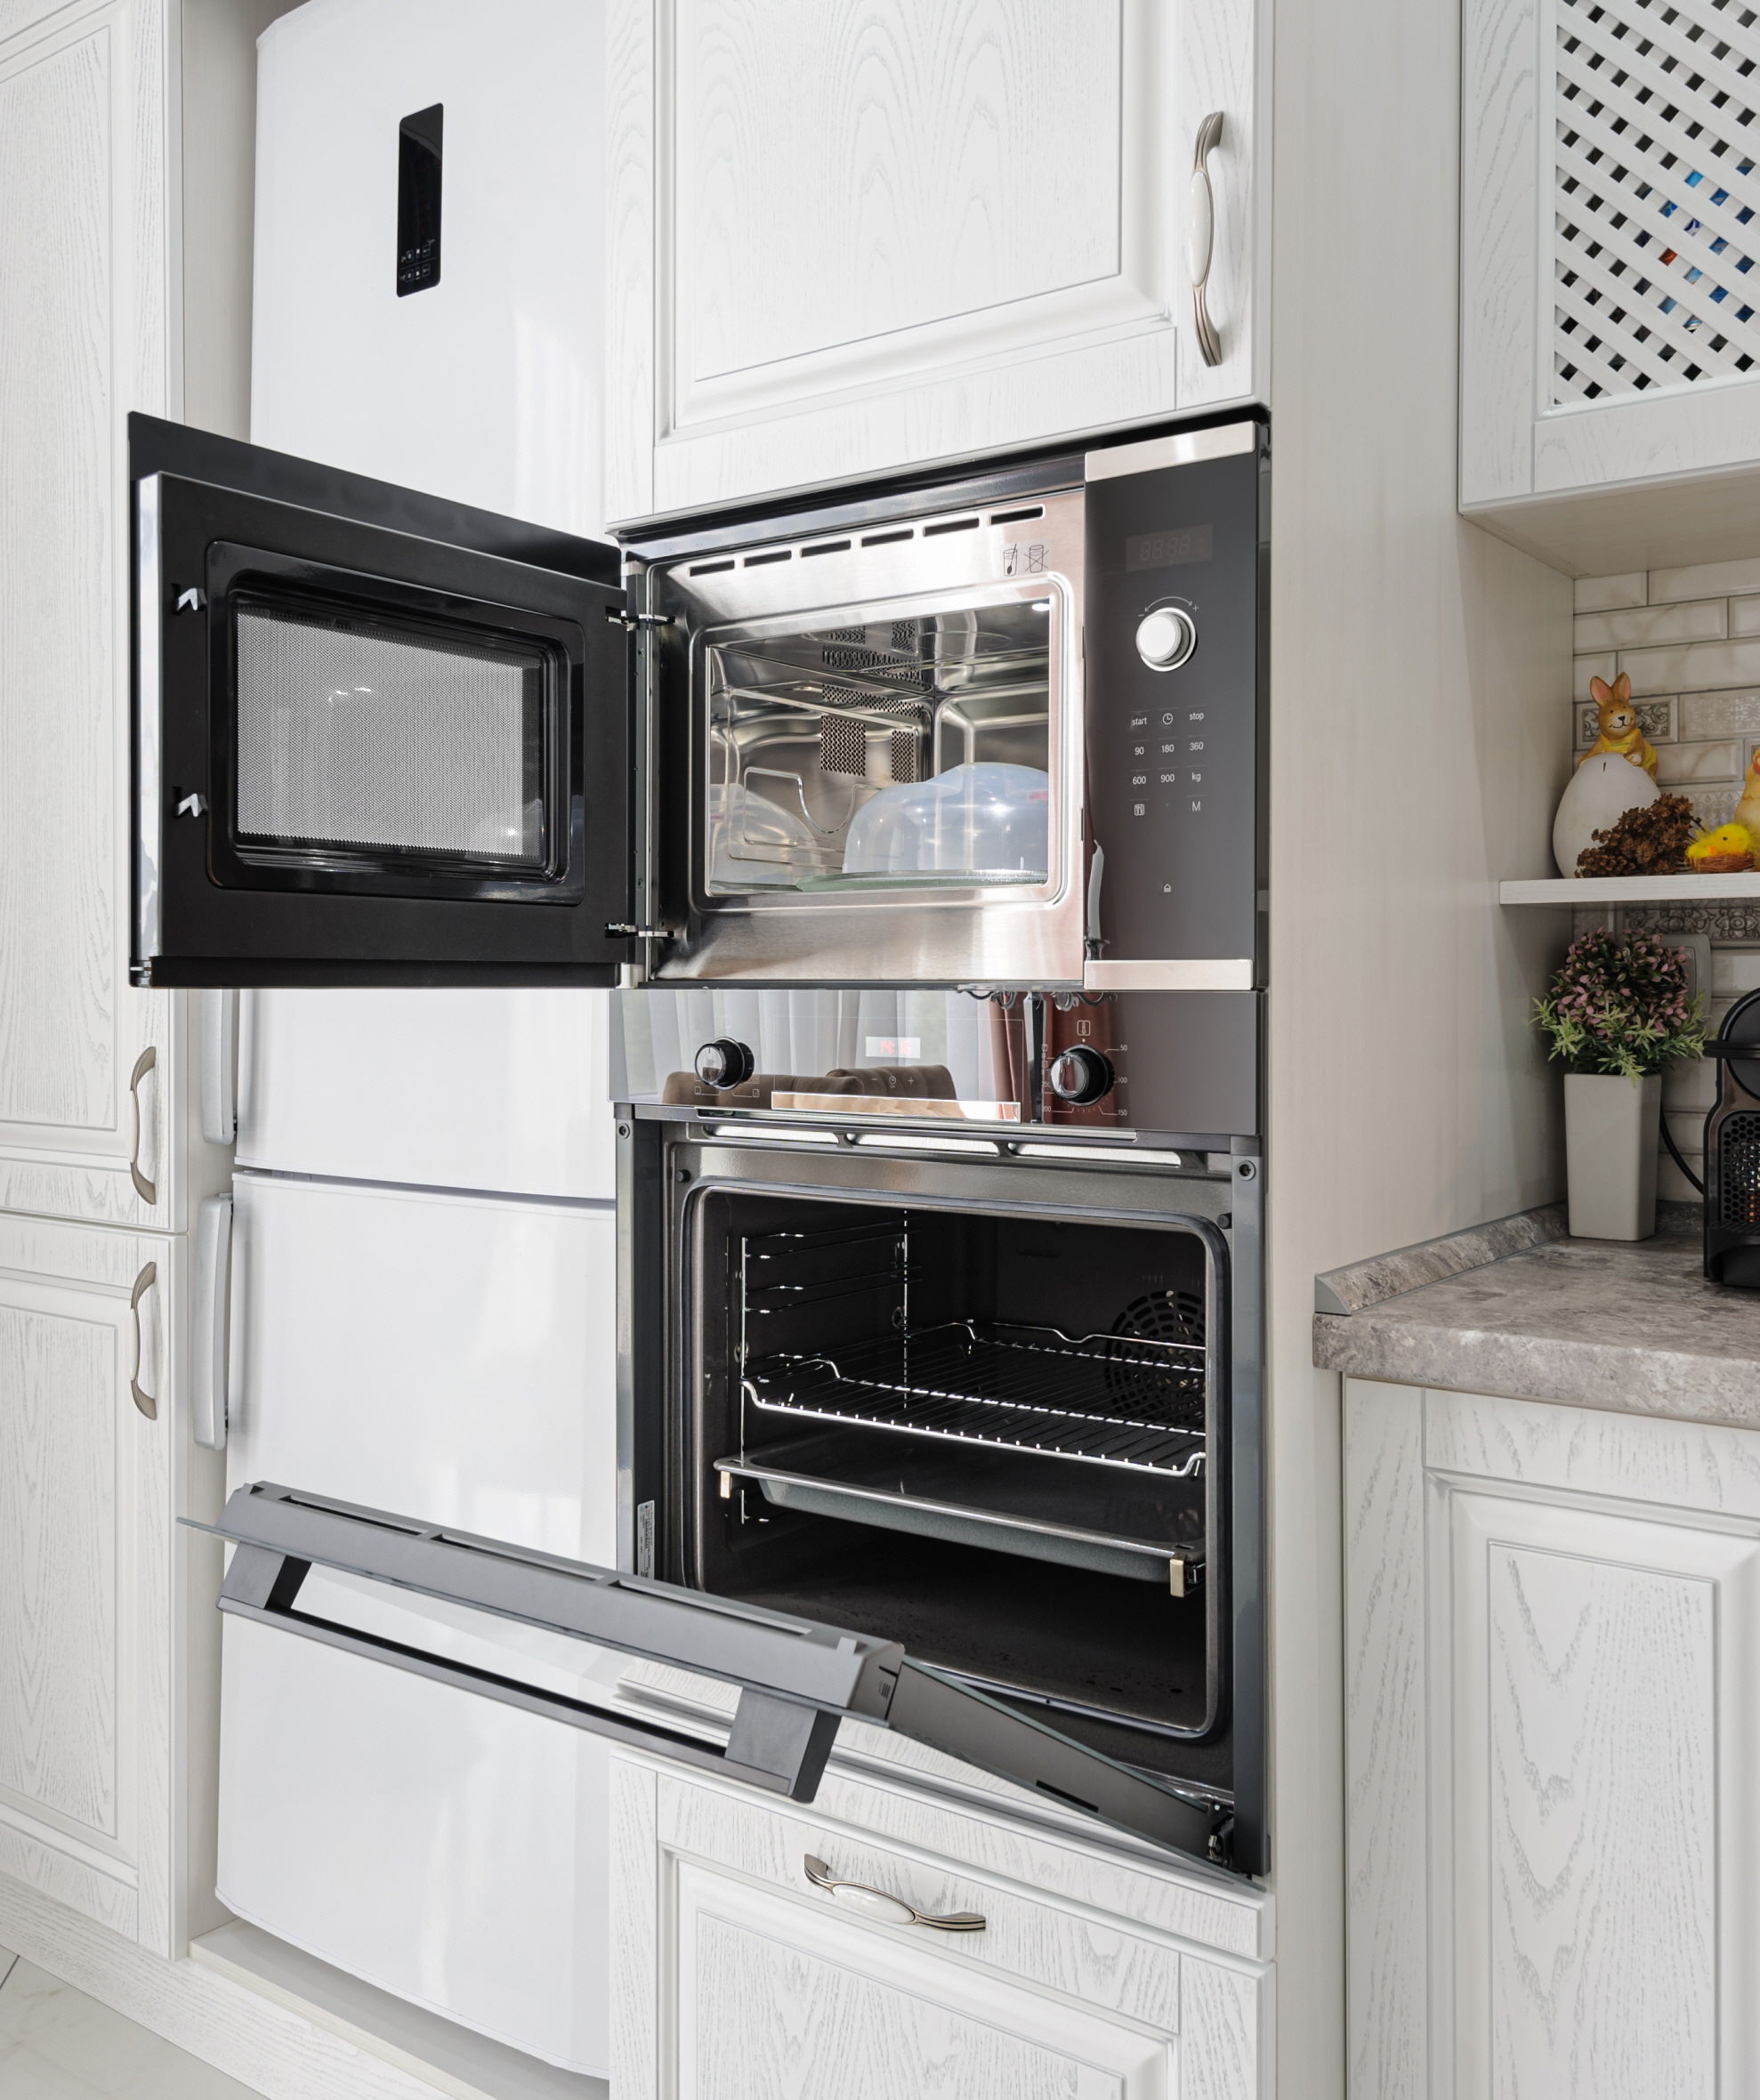 Choose built-in appliances for a sleek, space-saving look in your small kitchen.